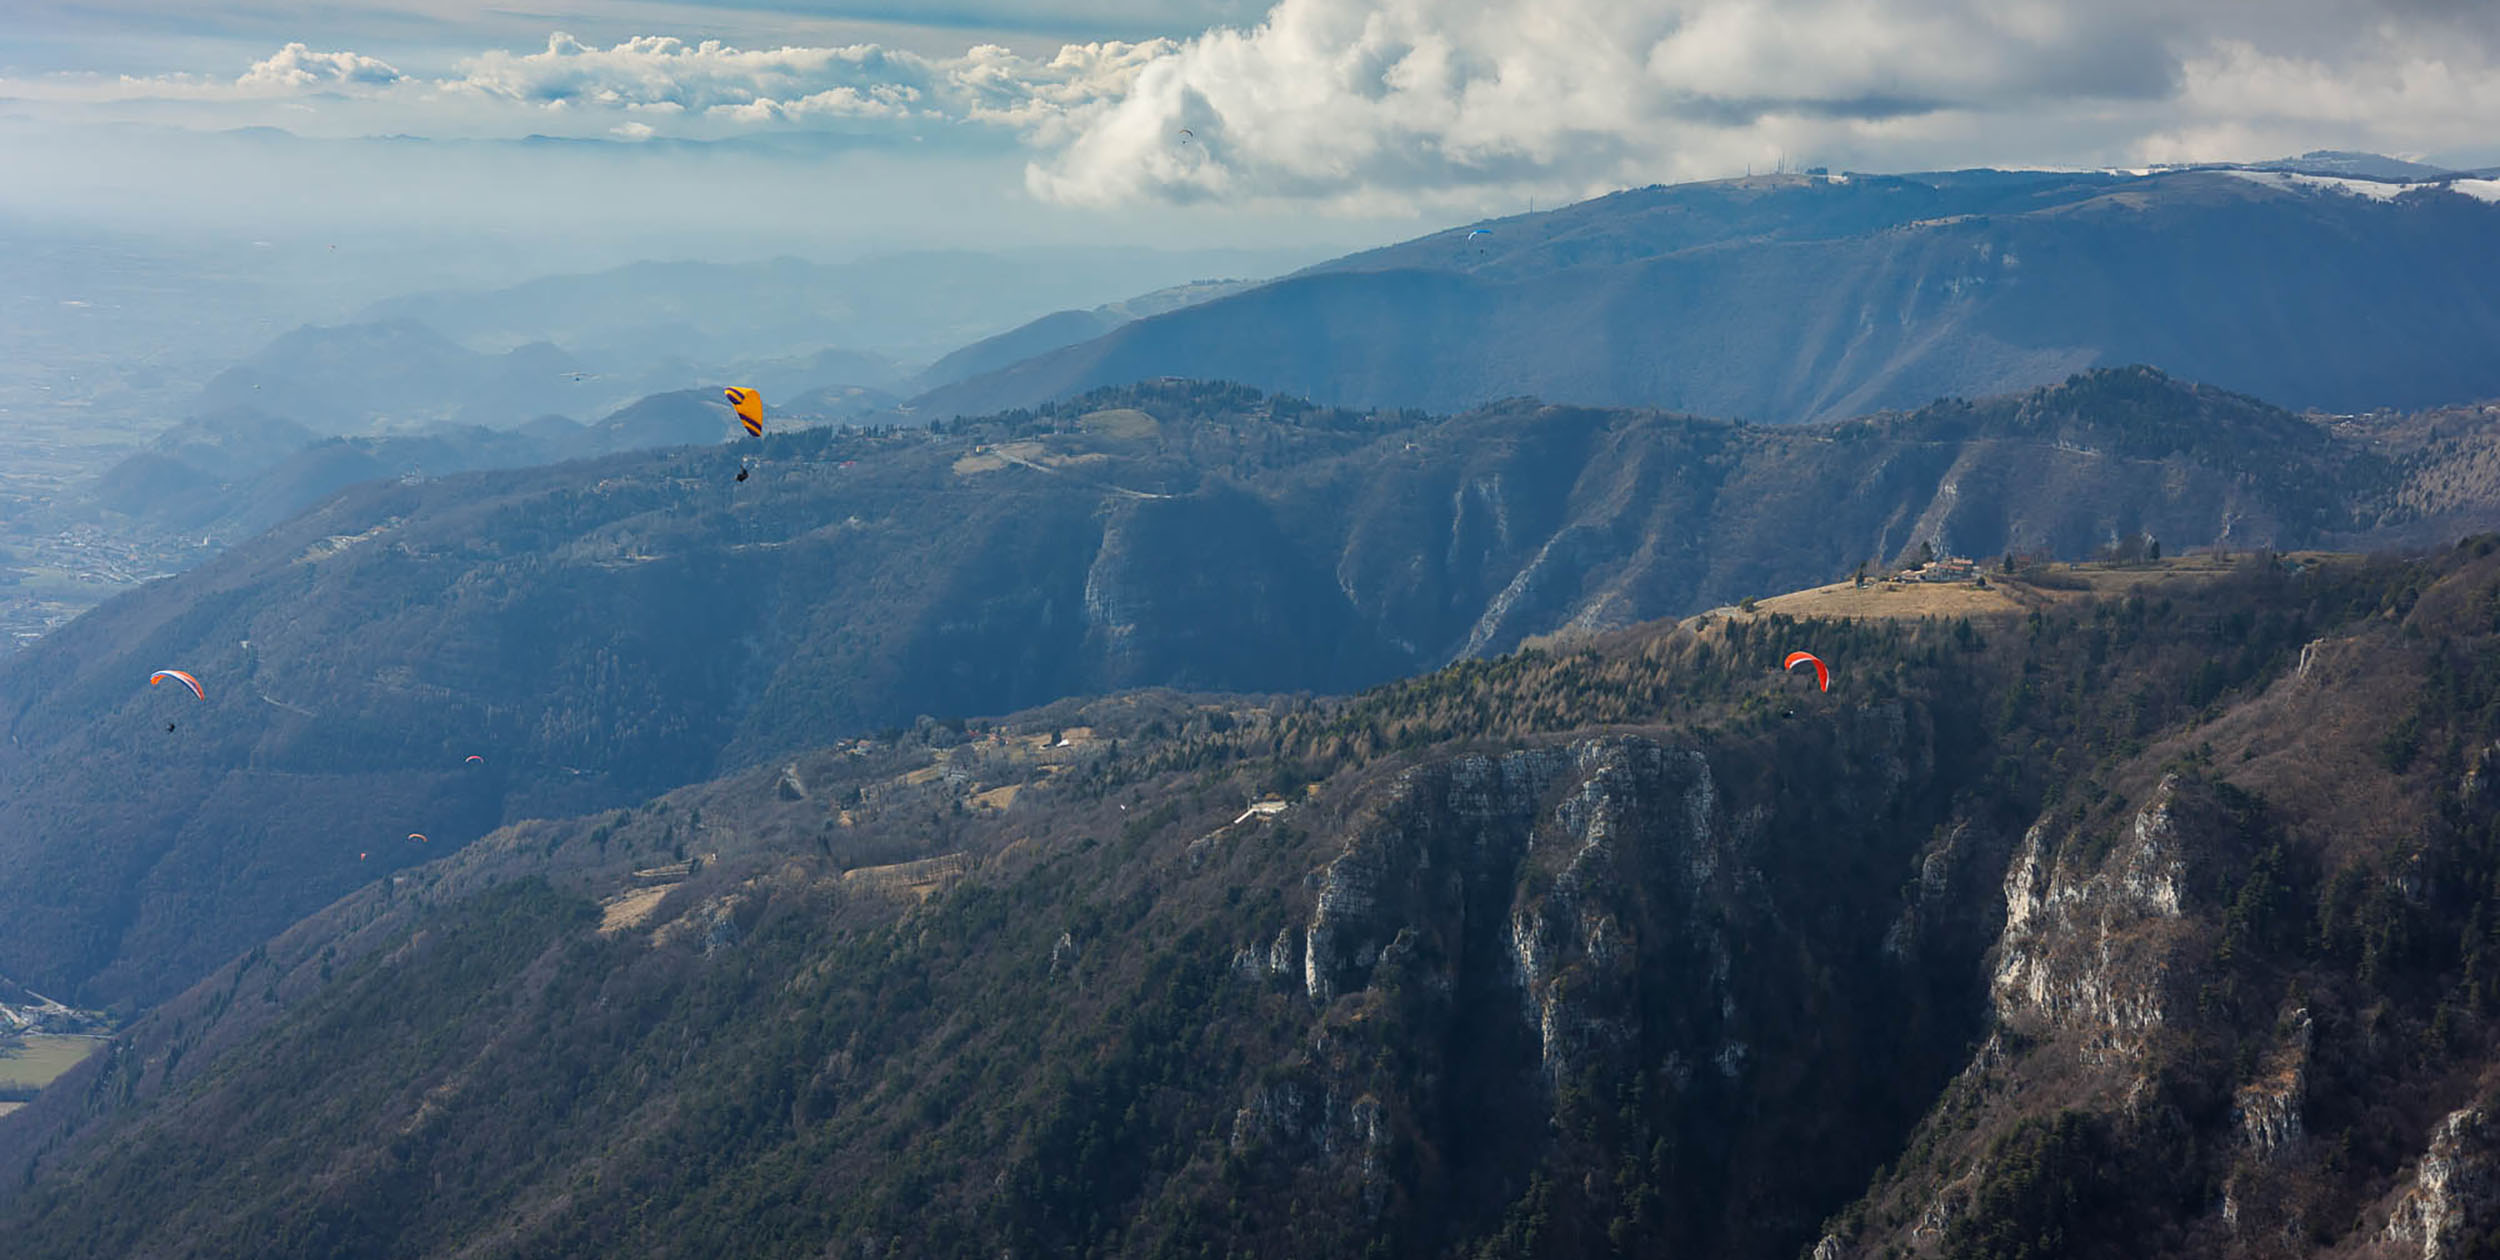 Paragliding in Bassano. Photo: Marcus King